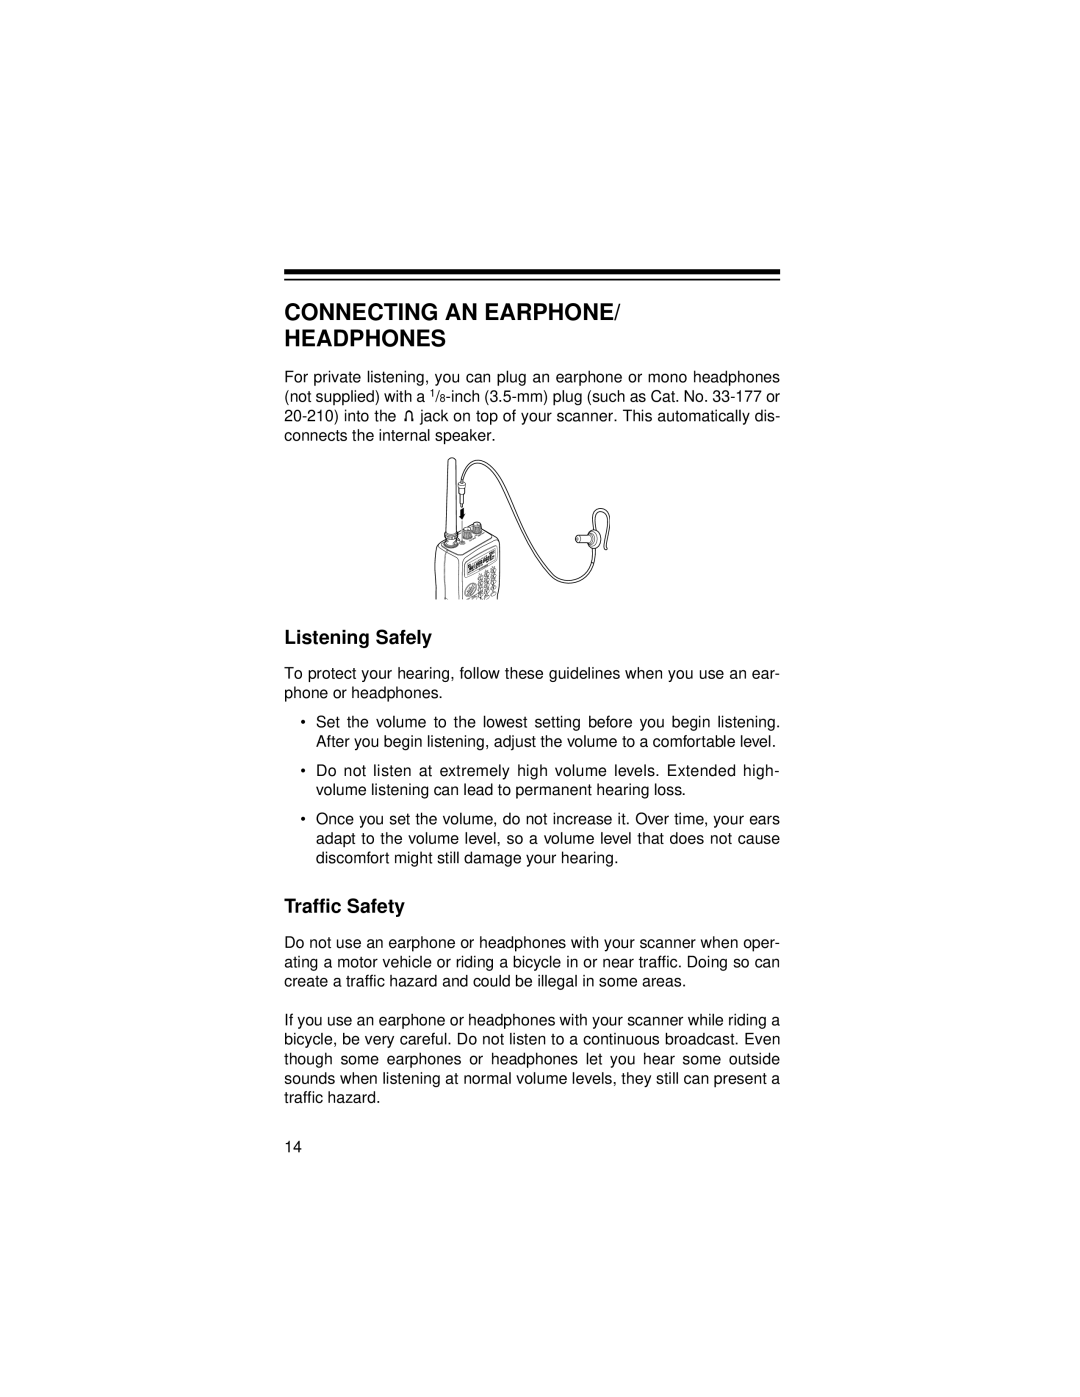 Radio Shack Pro-71 owner manual Connecting AN Earphone Headphones, Listening Safely, Traffic Safety 